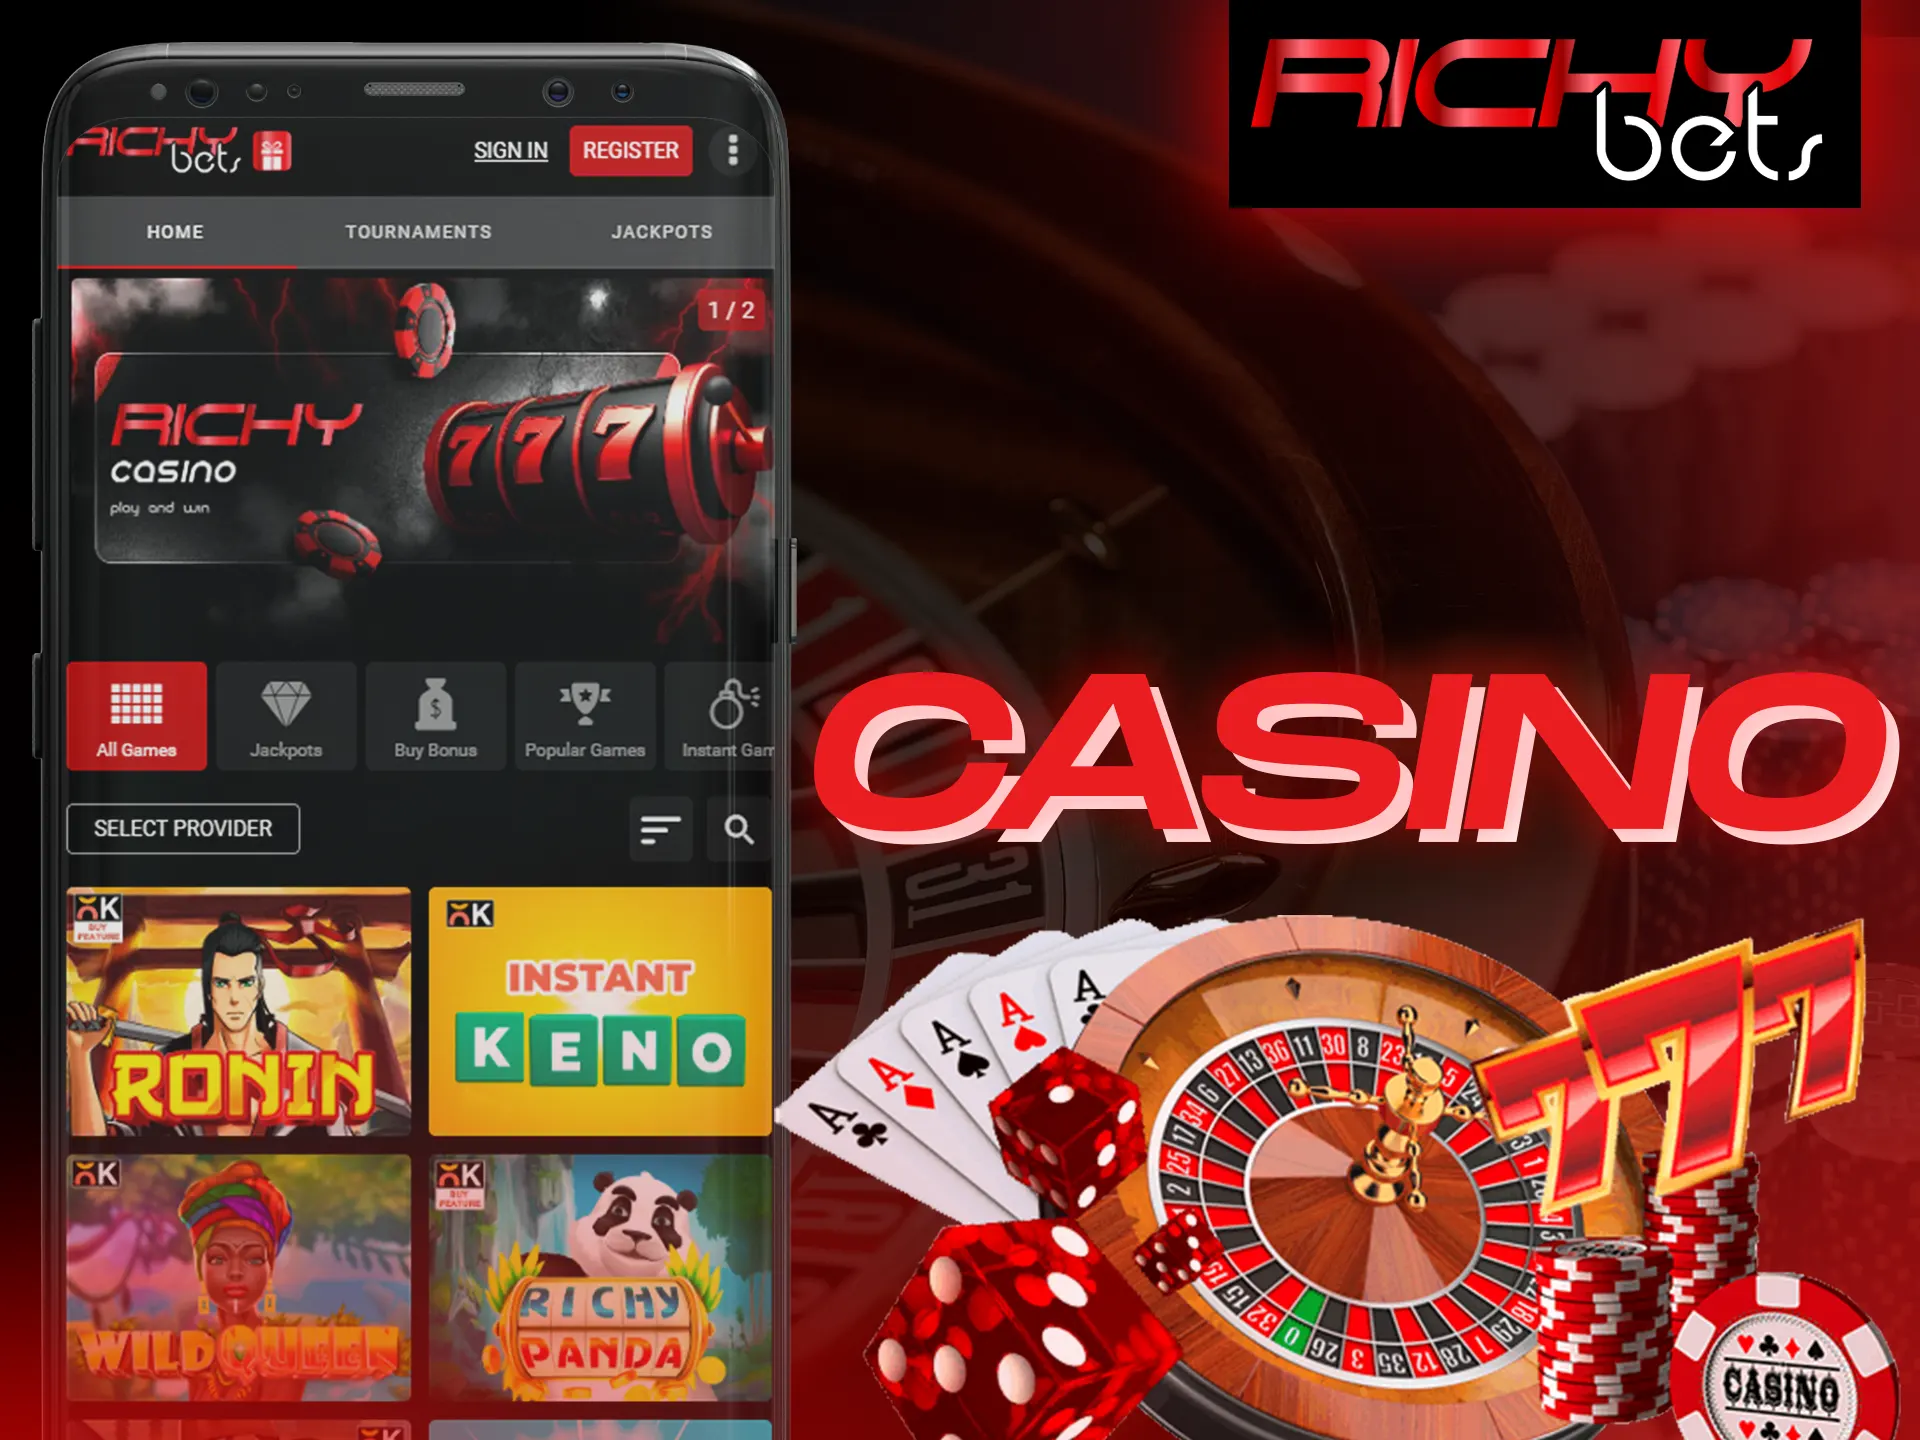 Visit the Richybets casino.